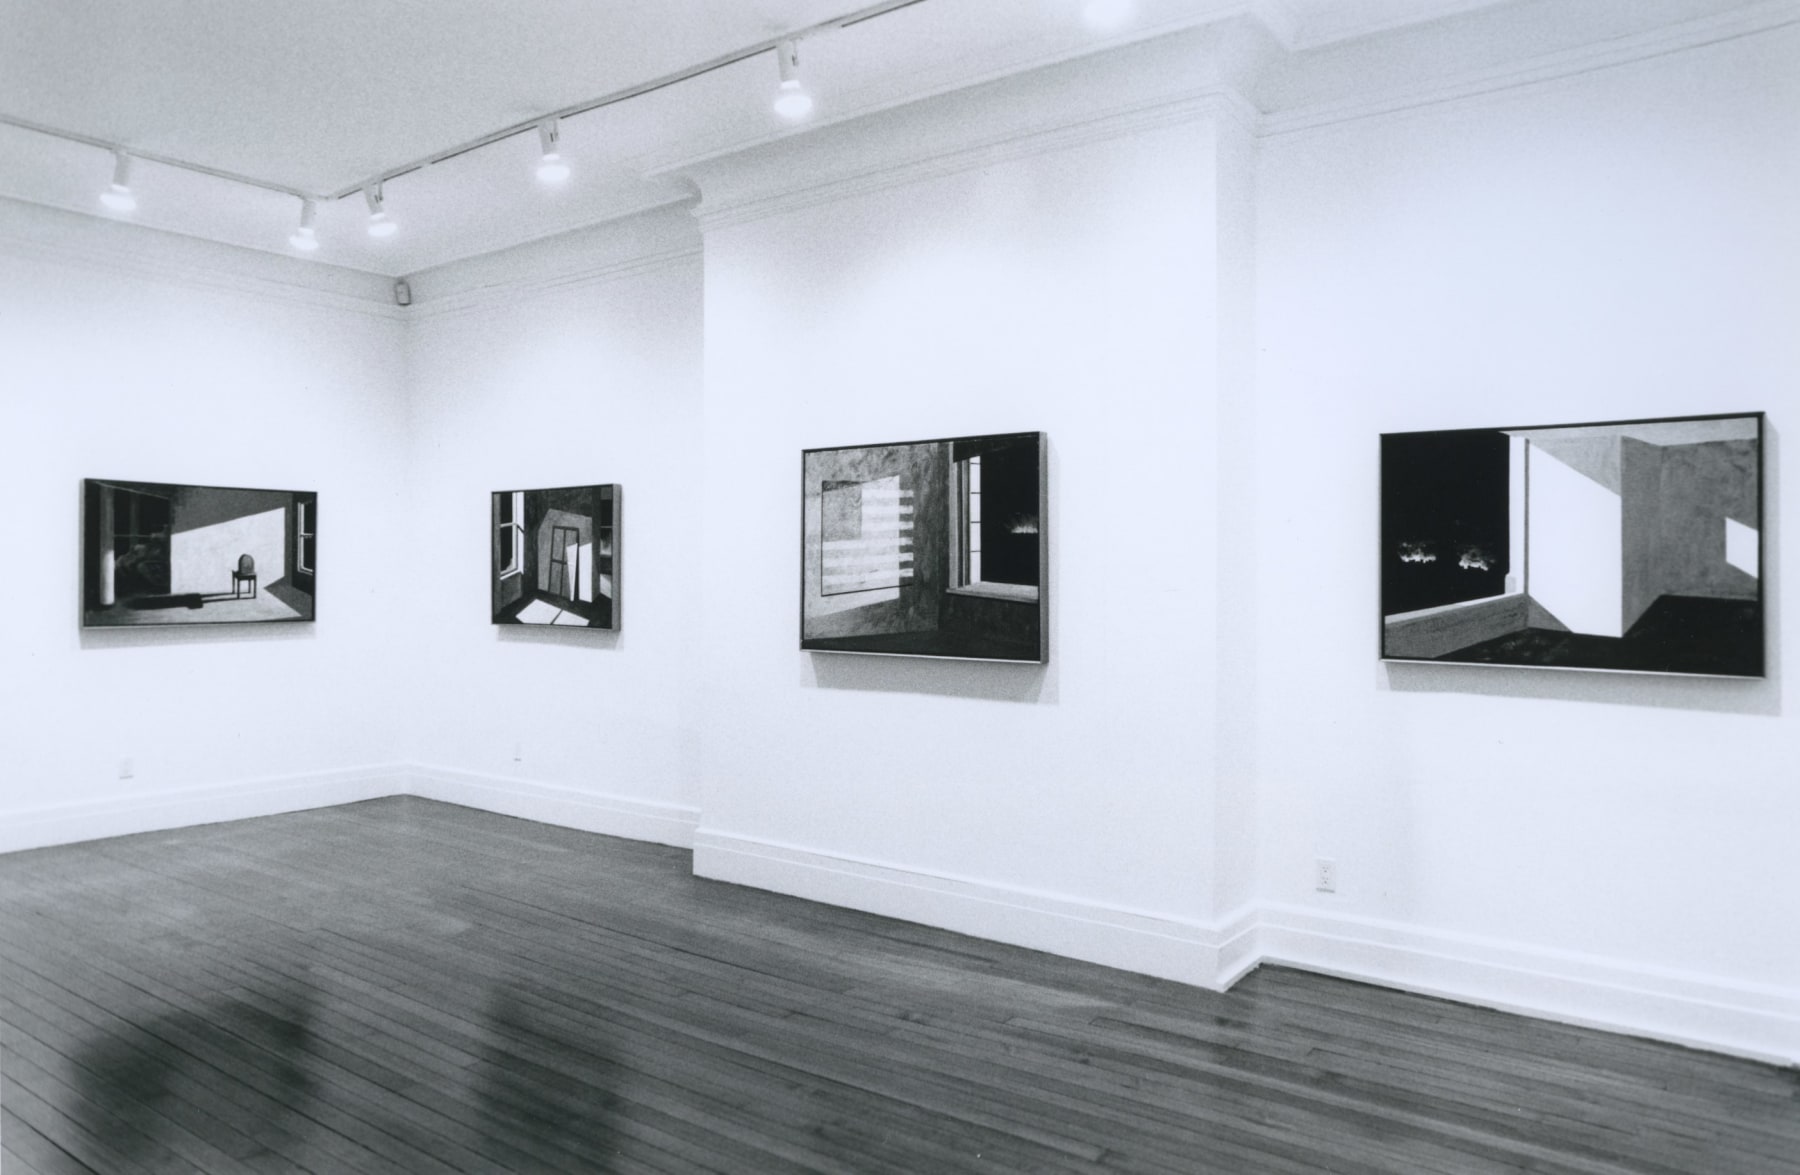 Installation view, Robert Morris: Small Fires and Mnemonic Nights, 18 EAST 77